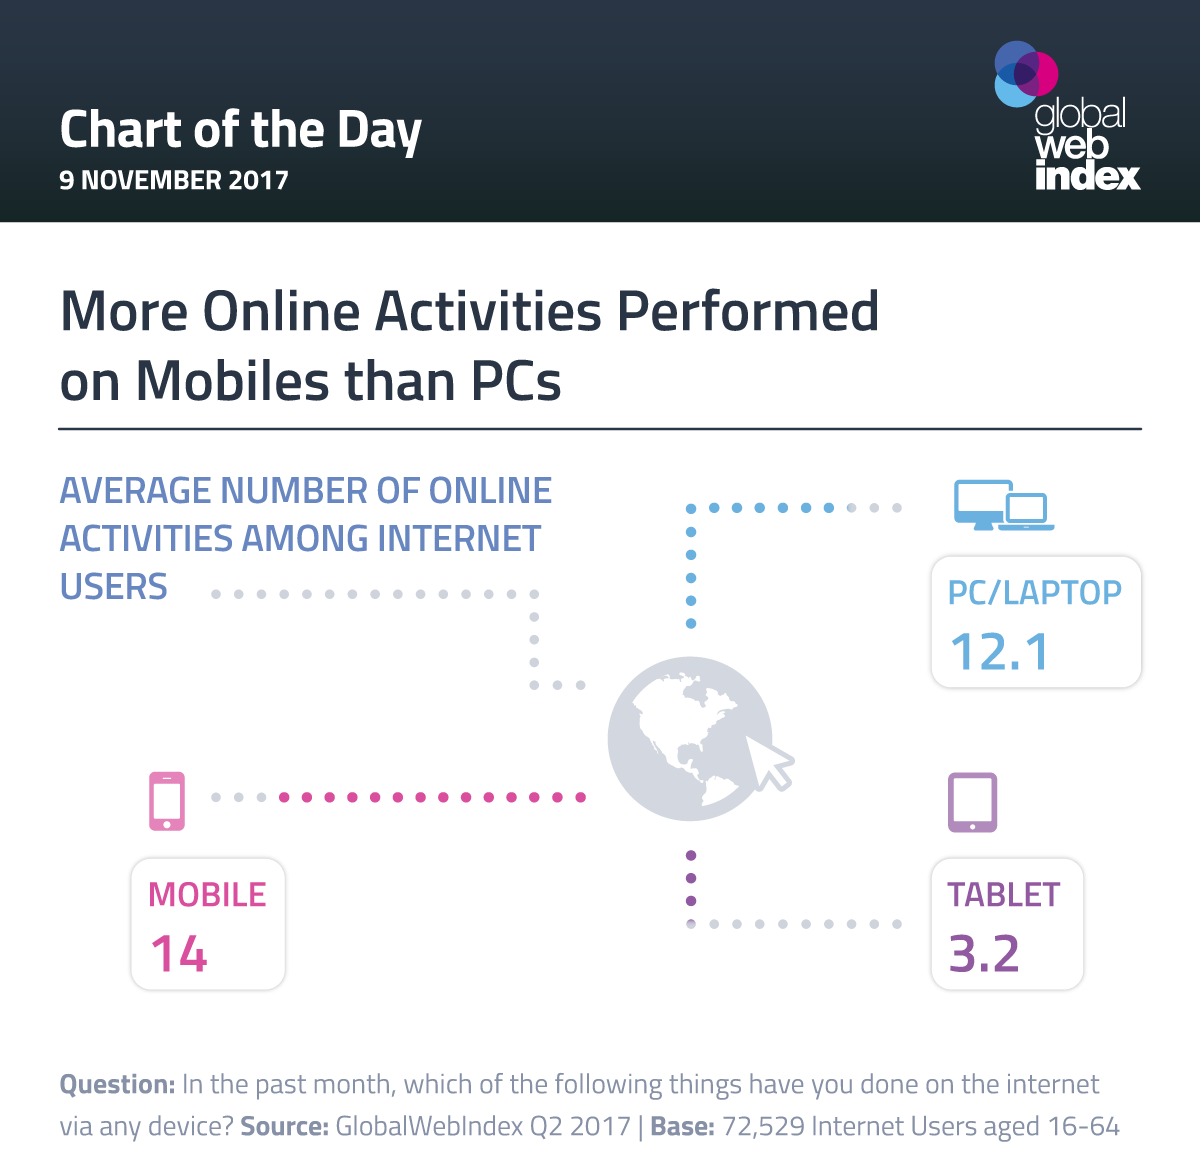 More Online Activities Performed on Mobiles than PCs